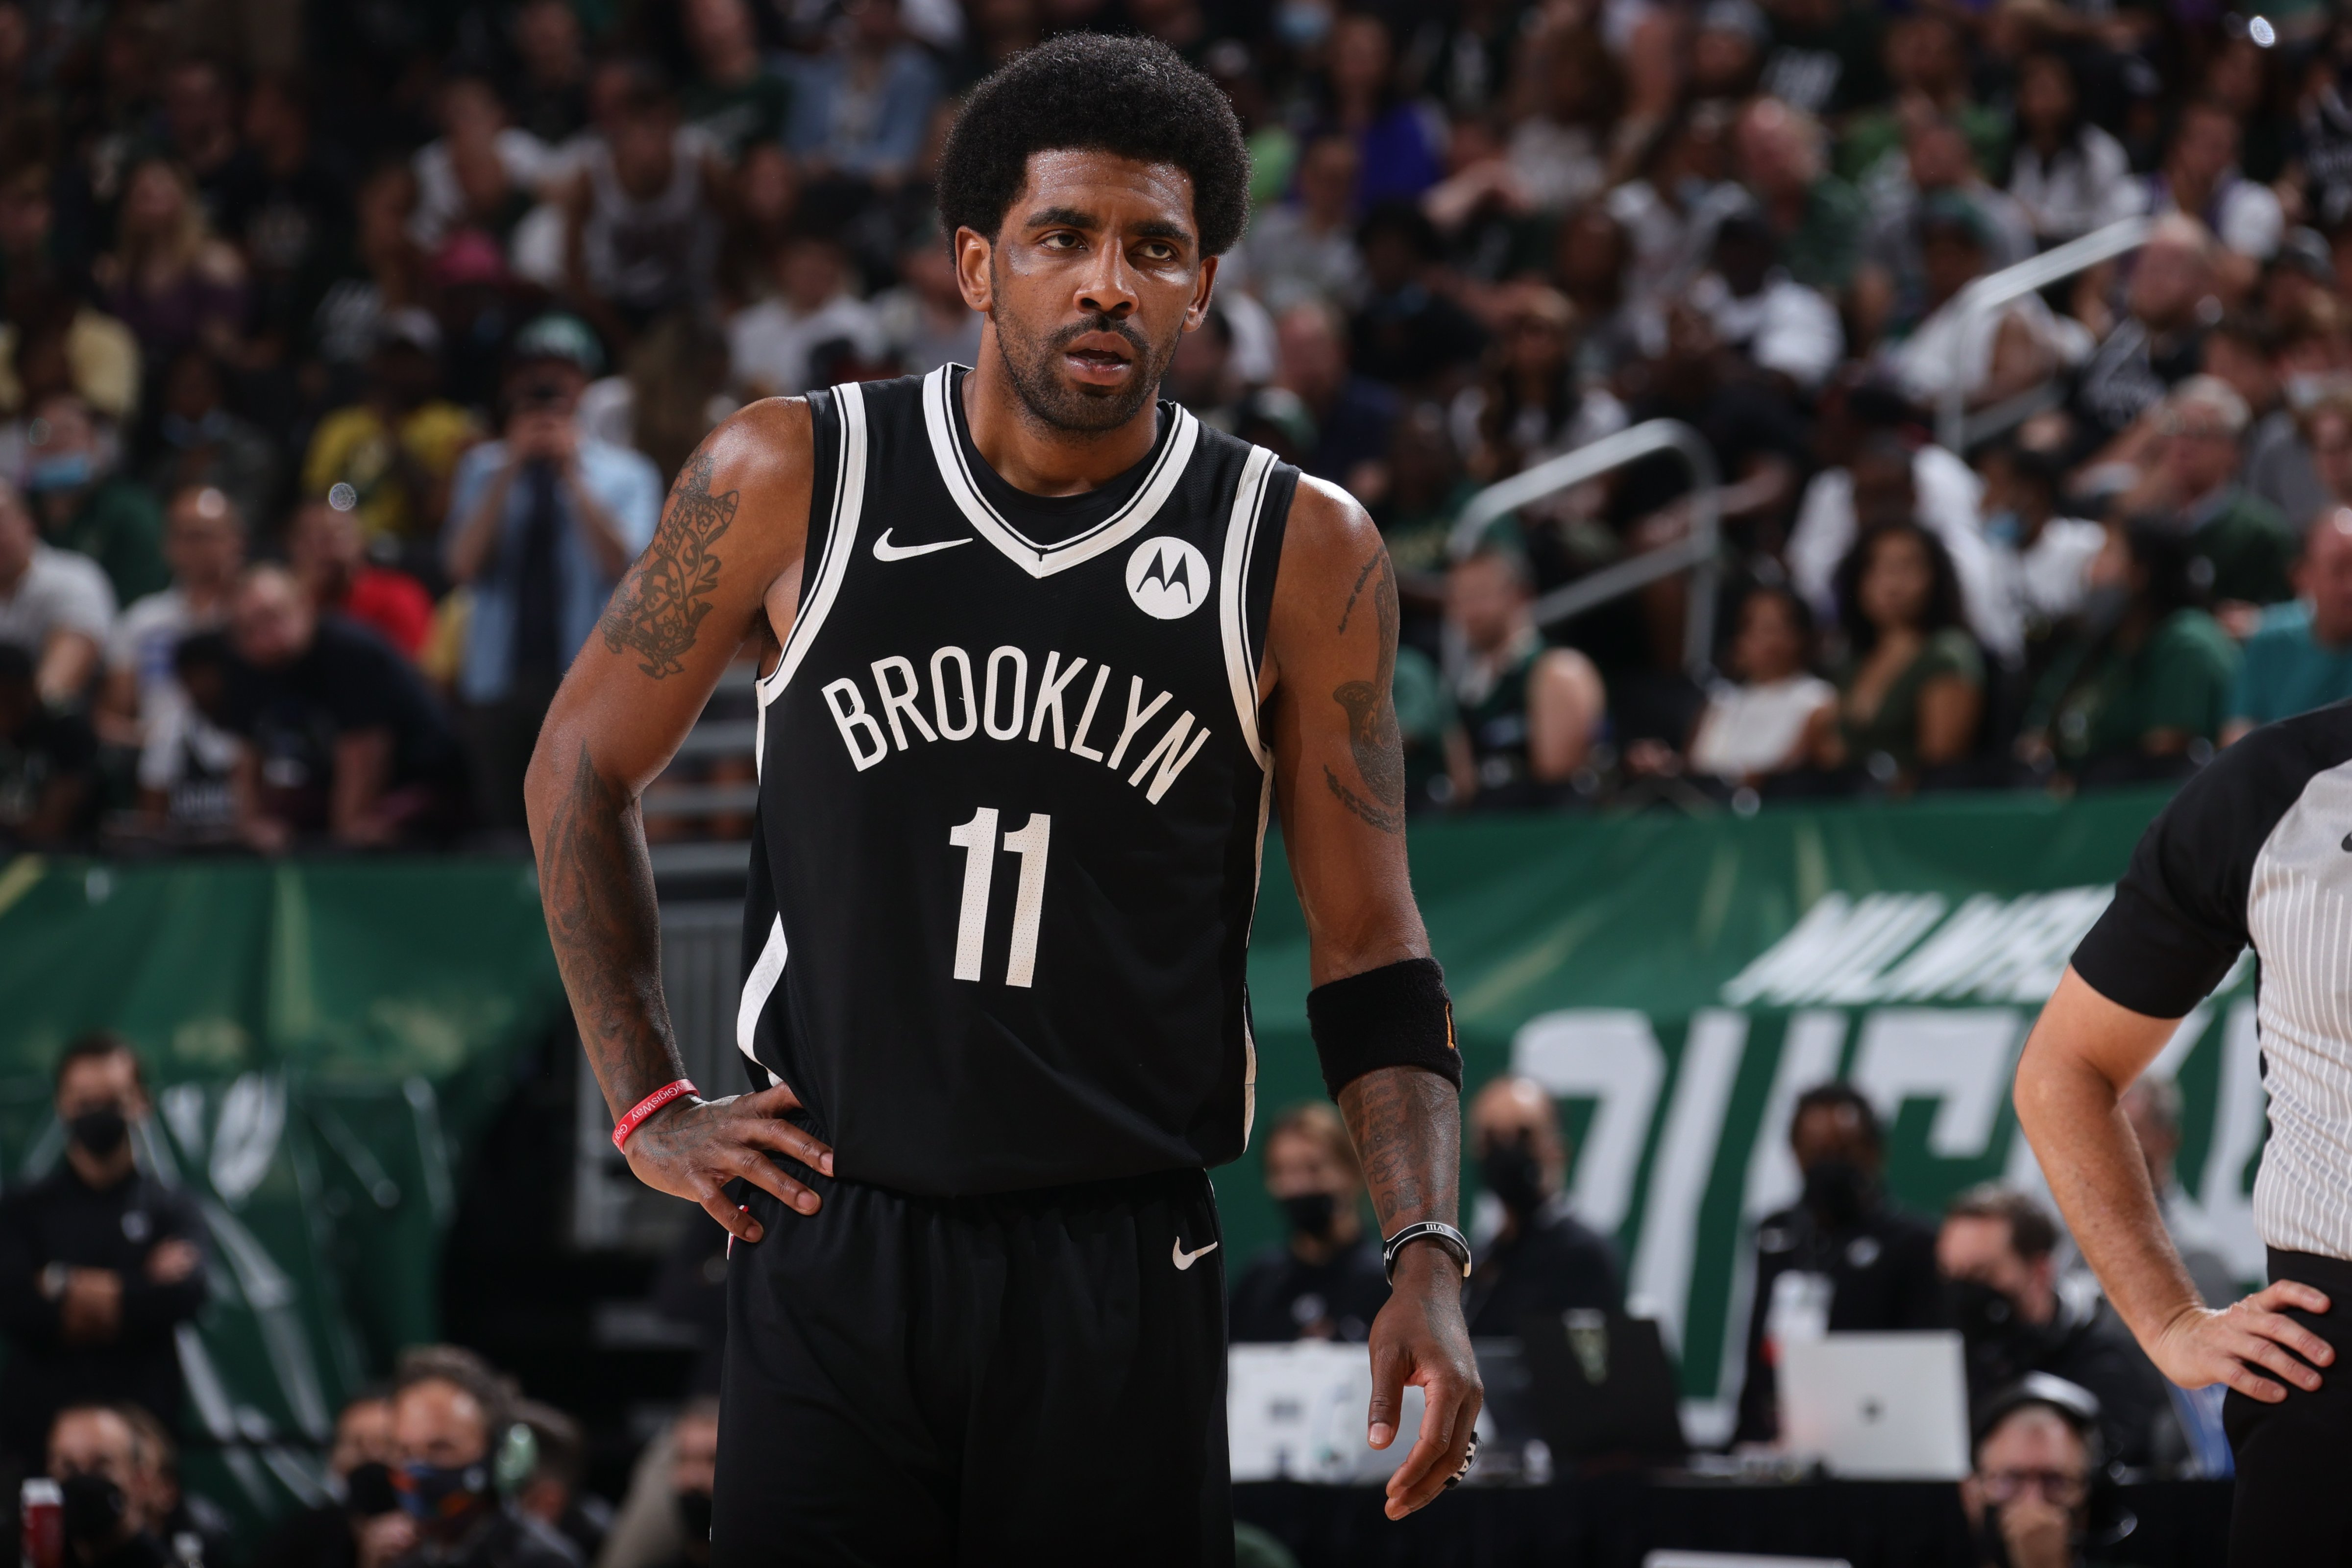 Kyrie Irving #11 of the Brooklyn Nets looks on during Round 2, Game 4 of the 2021 NBA Playoffs on June 13 2021 at the Fiserv Forum Center in Milwaukee, Wisconsin. (NBAE via Getty Images&mdash;2021 NBAE)